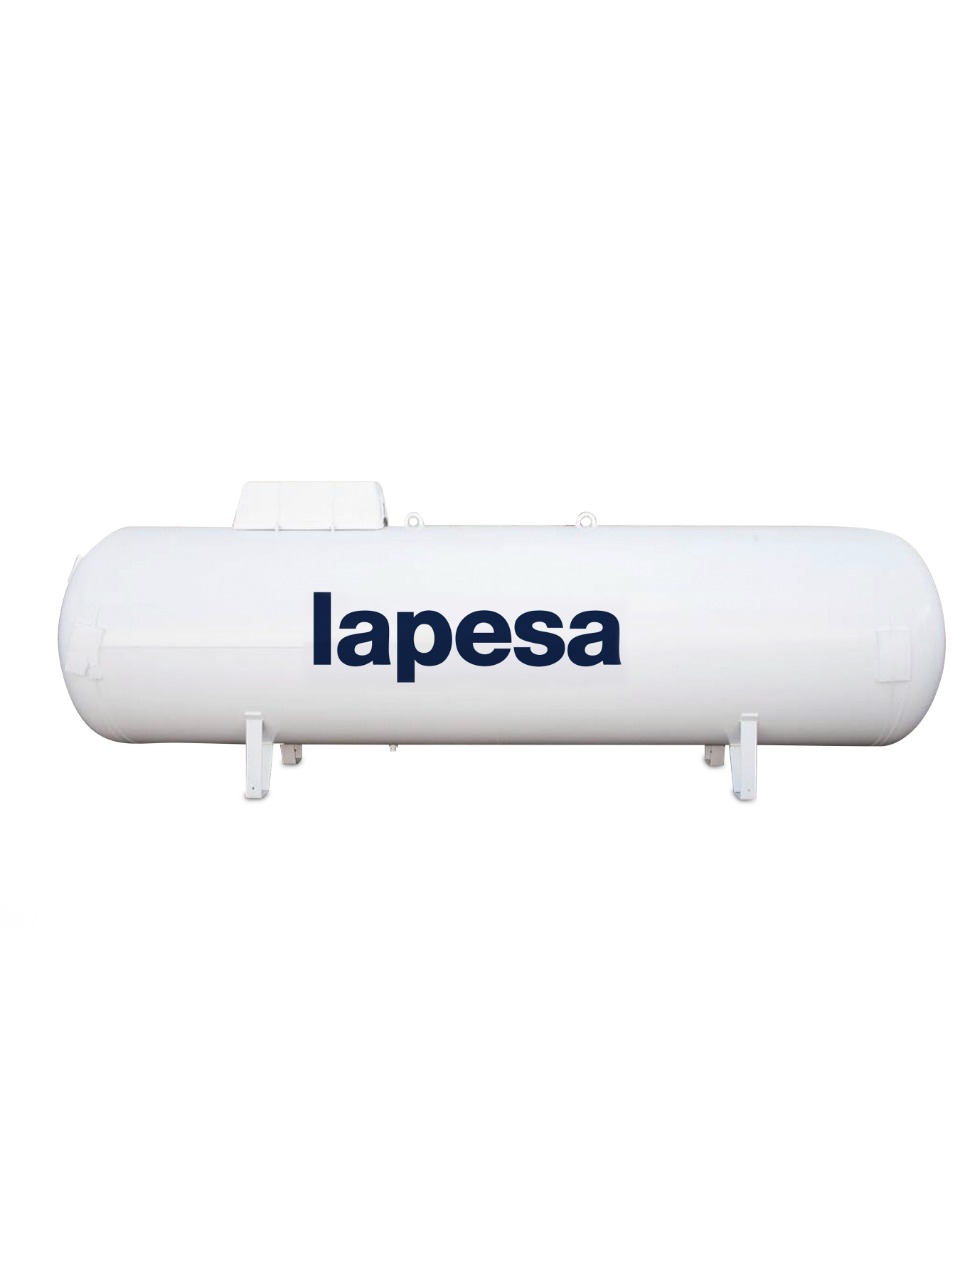 LPG TANK LAPESA 2,450 LITERS, ABOVE GROUND WITH STANDARD VALVE FITTINGS from Gas Equipment Company Llc Abu Dhabi, UNITED ARAB EMIRATES